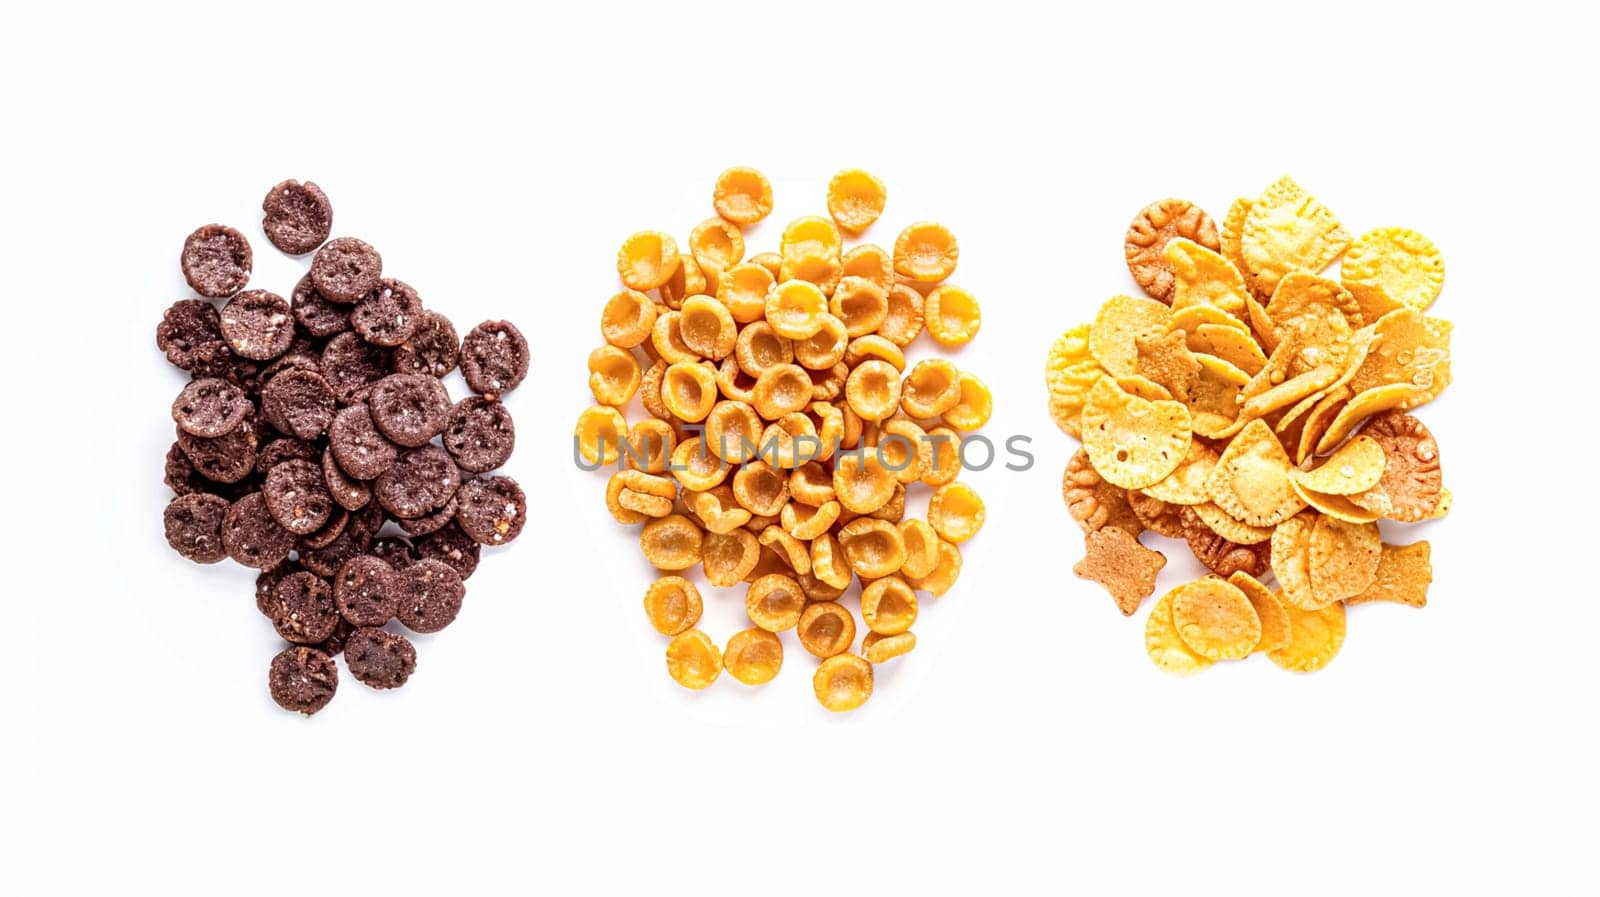 Assortment of cereal, grains, muesli or oats for healthy breakfast, organic farm market product isolated on white background